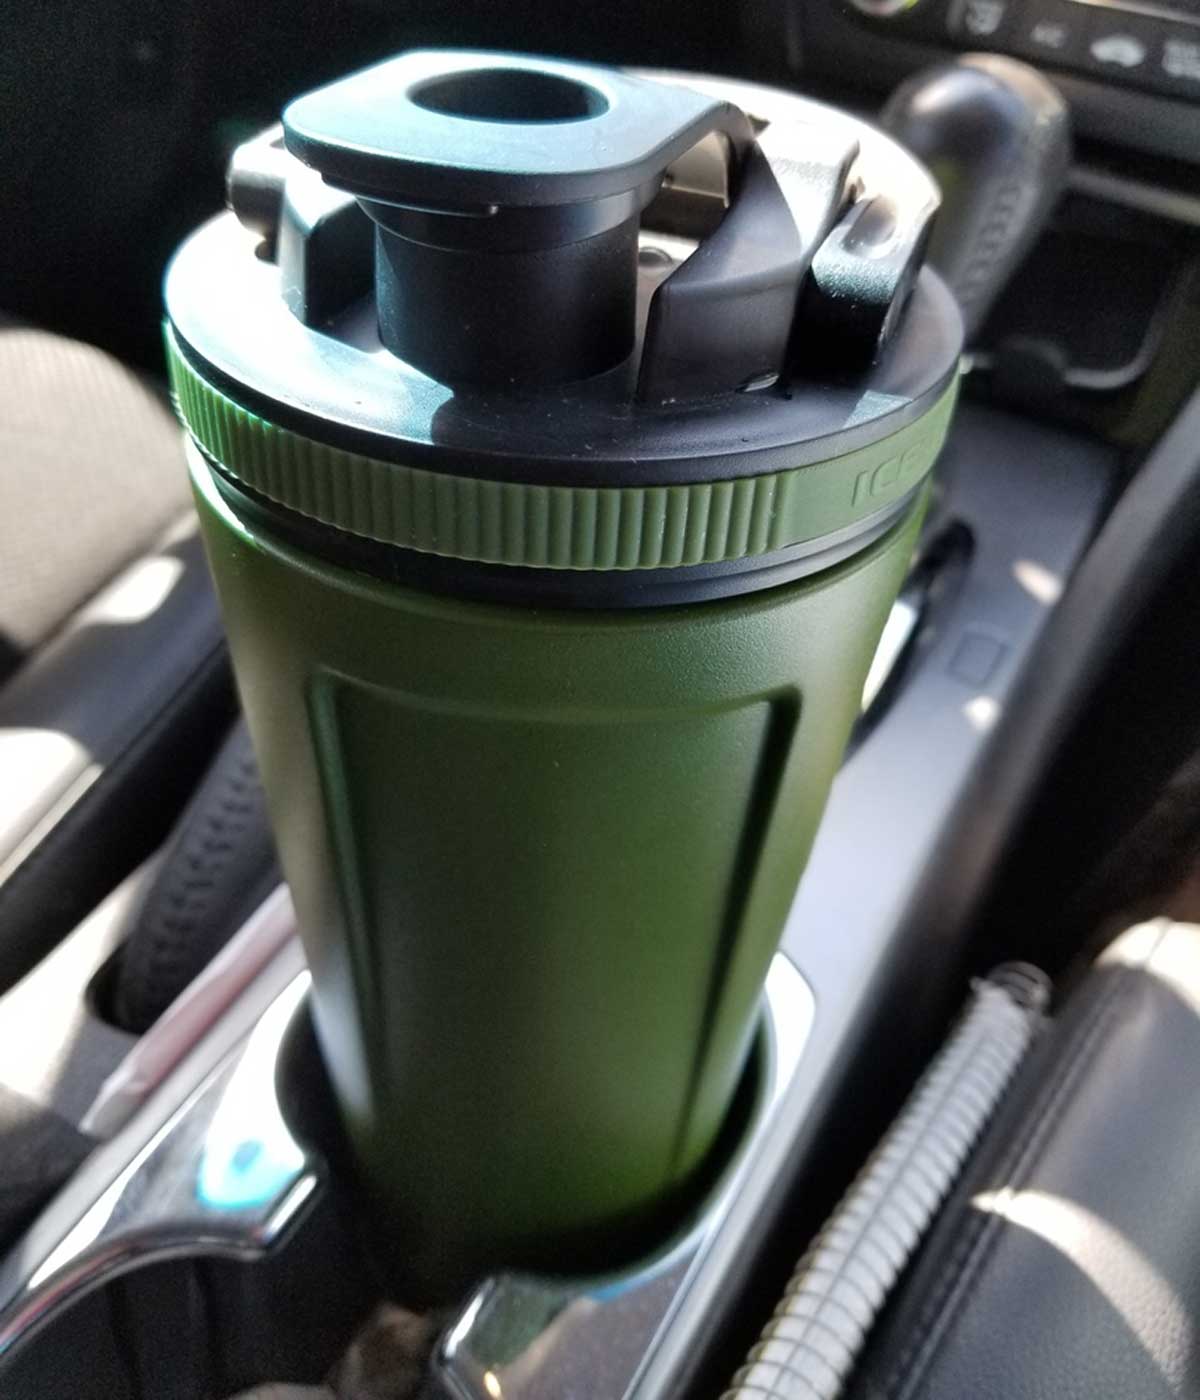 A green-colored 36oz Ice Shaker fitting in a car's cup holder.